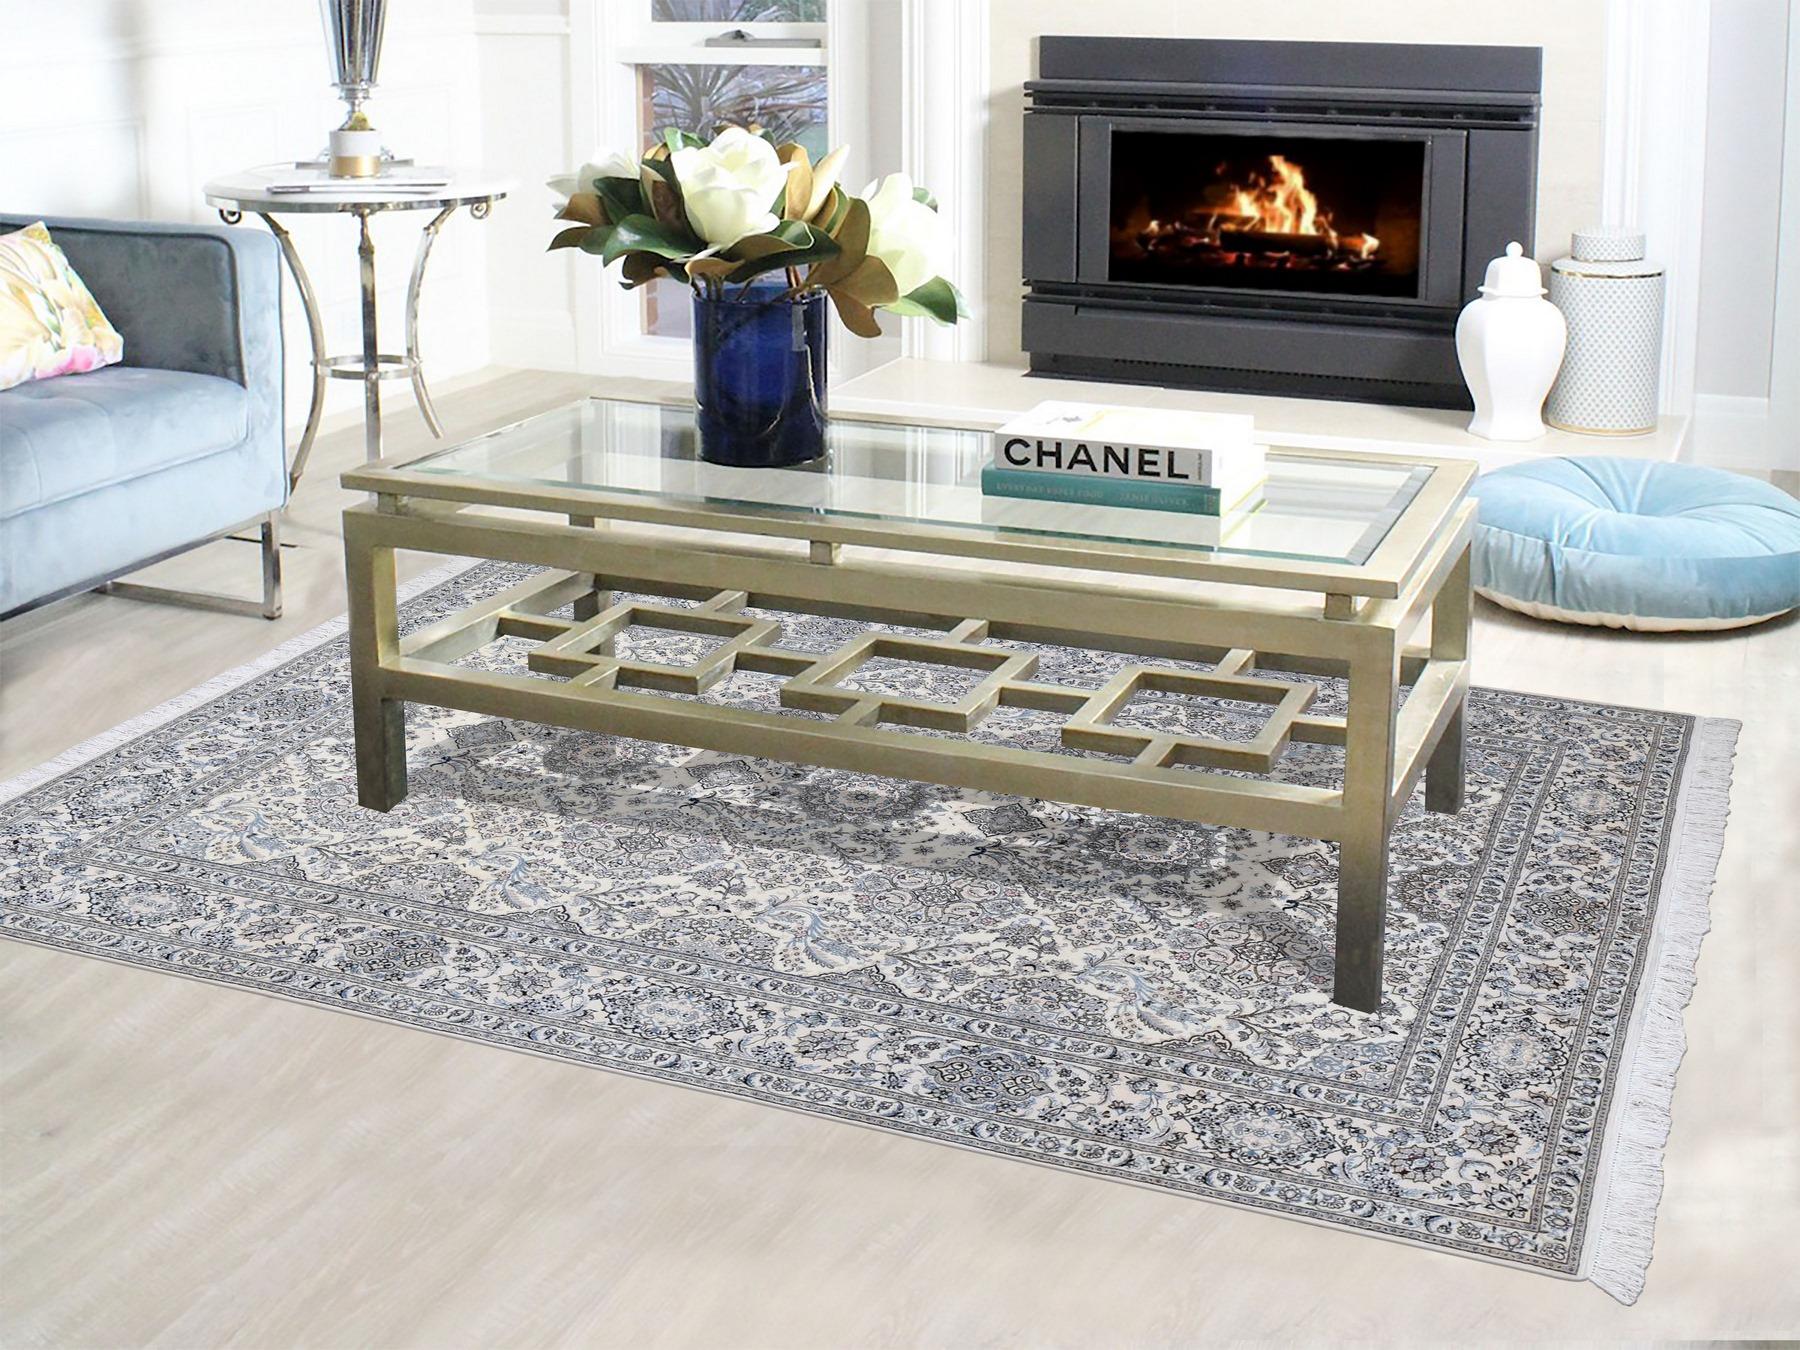 This fabulous hand knotted carpet has been created and designed for extra strength and durability. This rug has been handcrafted for weeks in the traditional method that is used to make Rugs. This is truly a one-of-kind piece. 

Exact Rug Size in